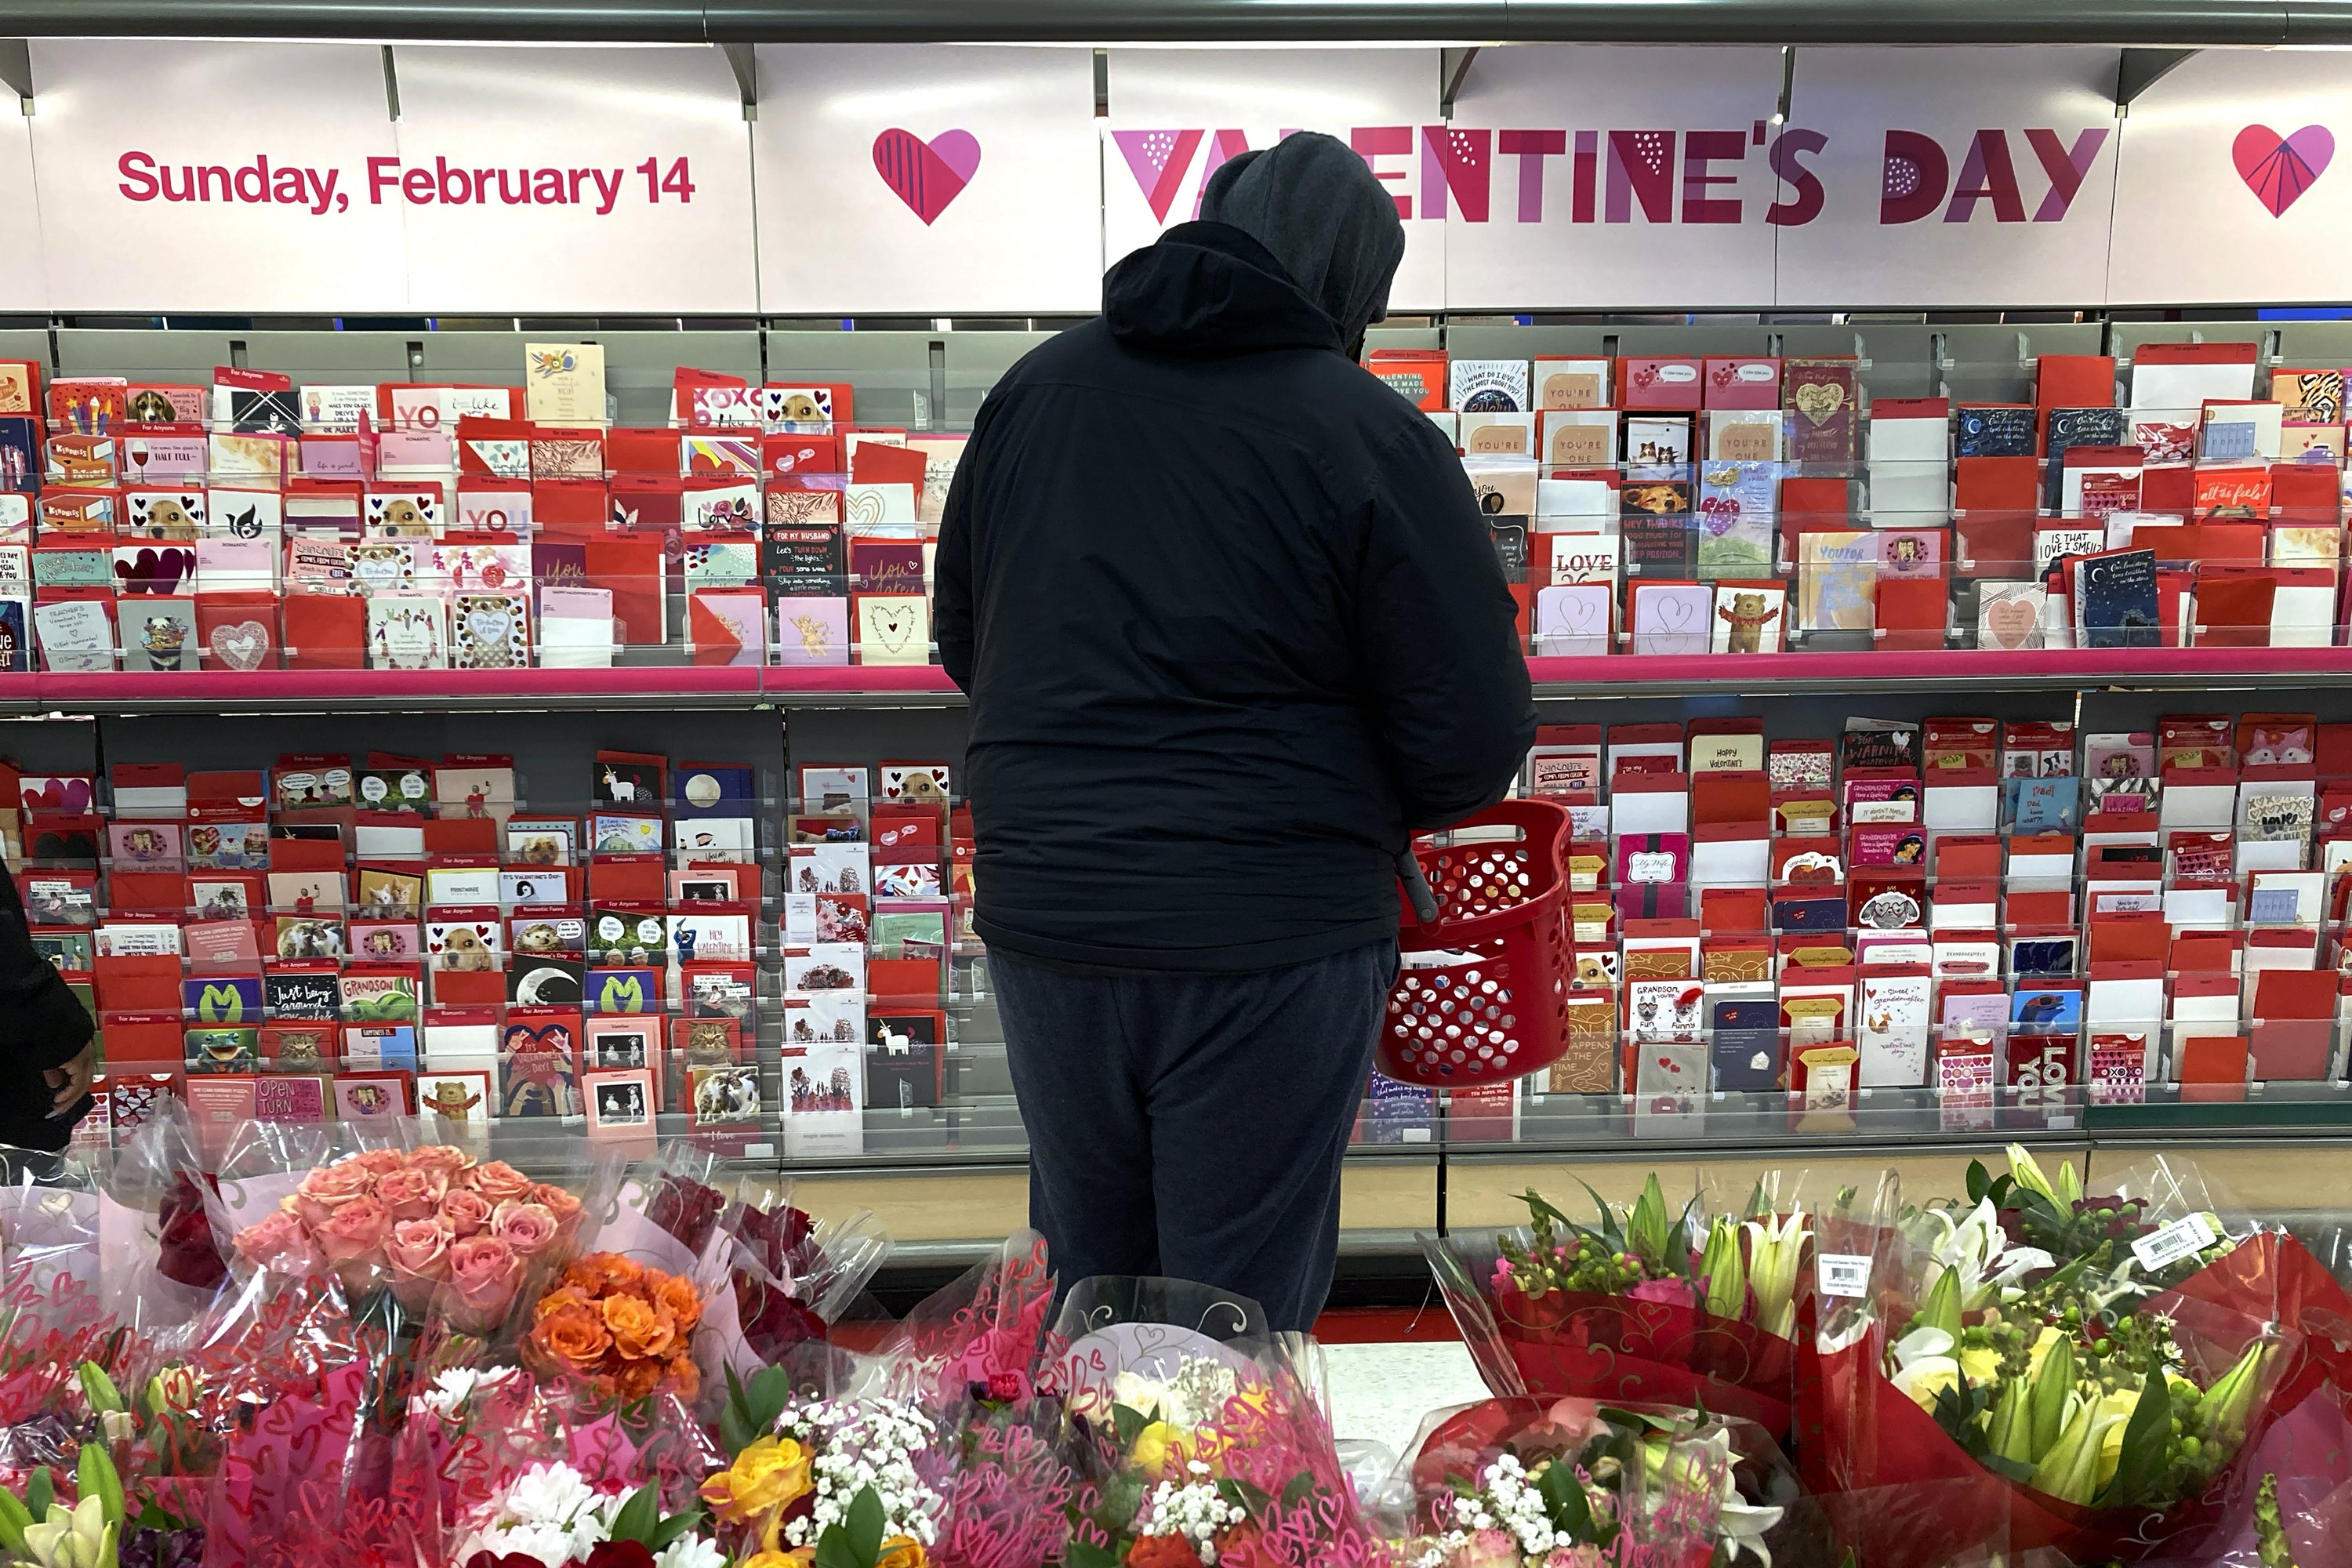 A gloomy Valentine’s Day, lovers find hope in roses, vaccinations